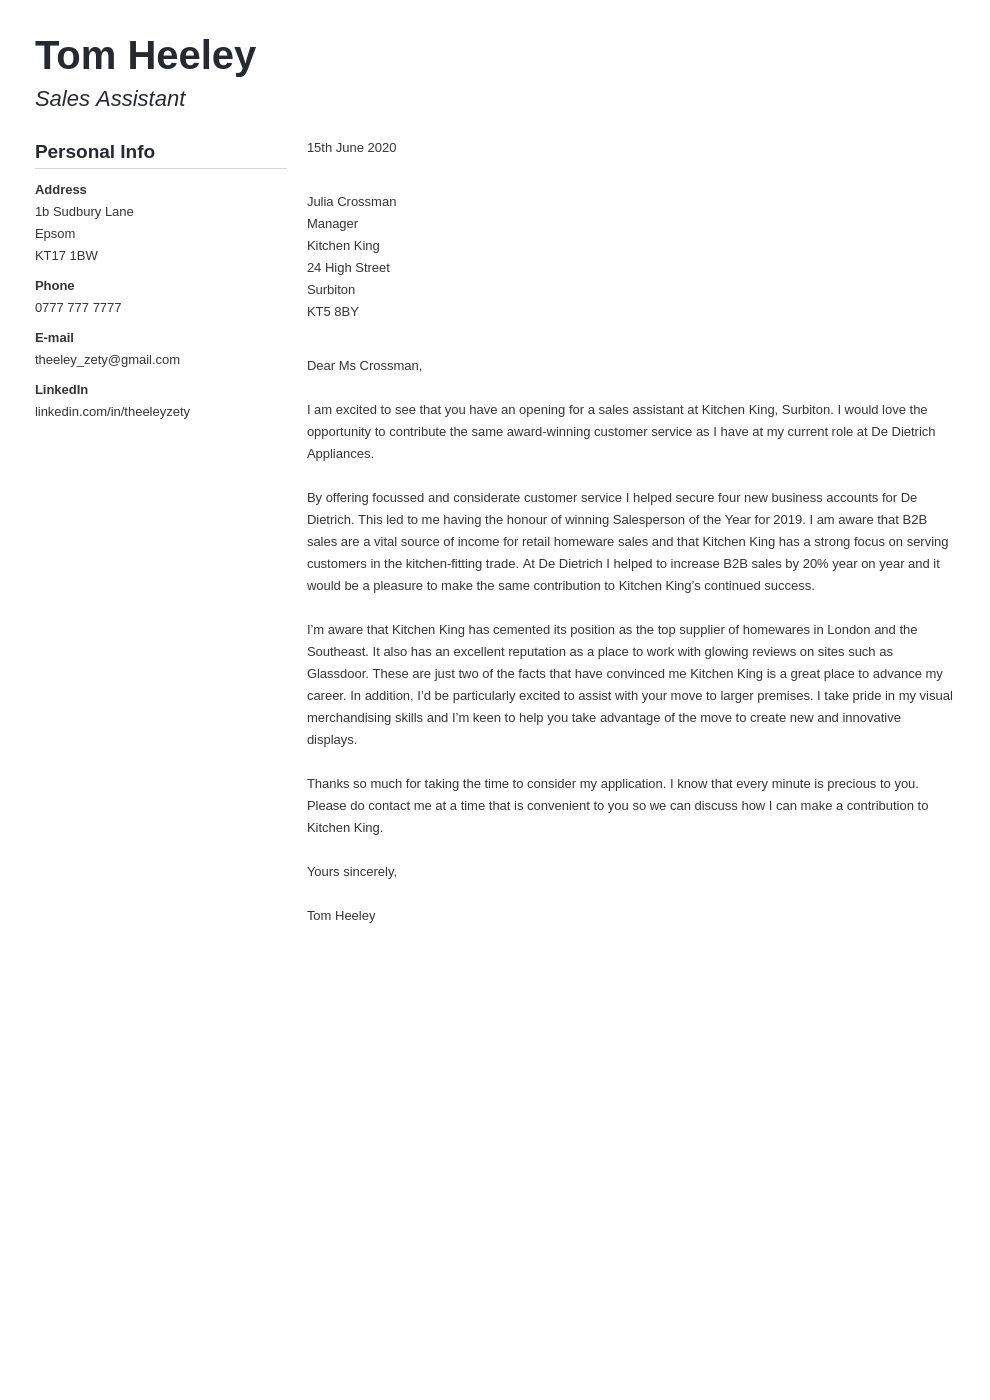 sales assistant job application letter example